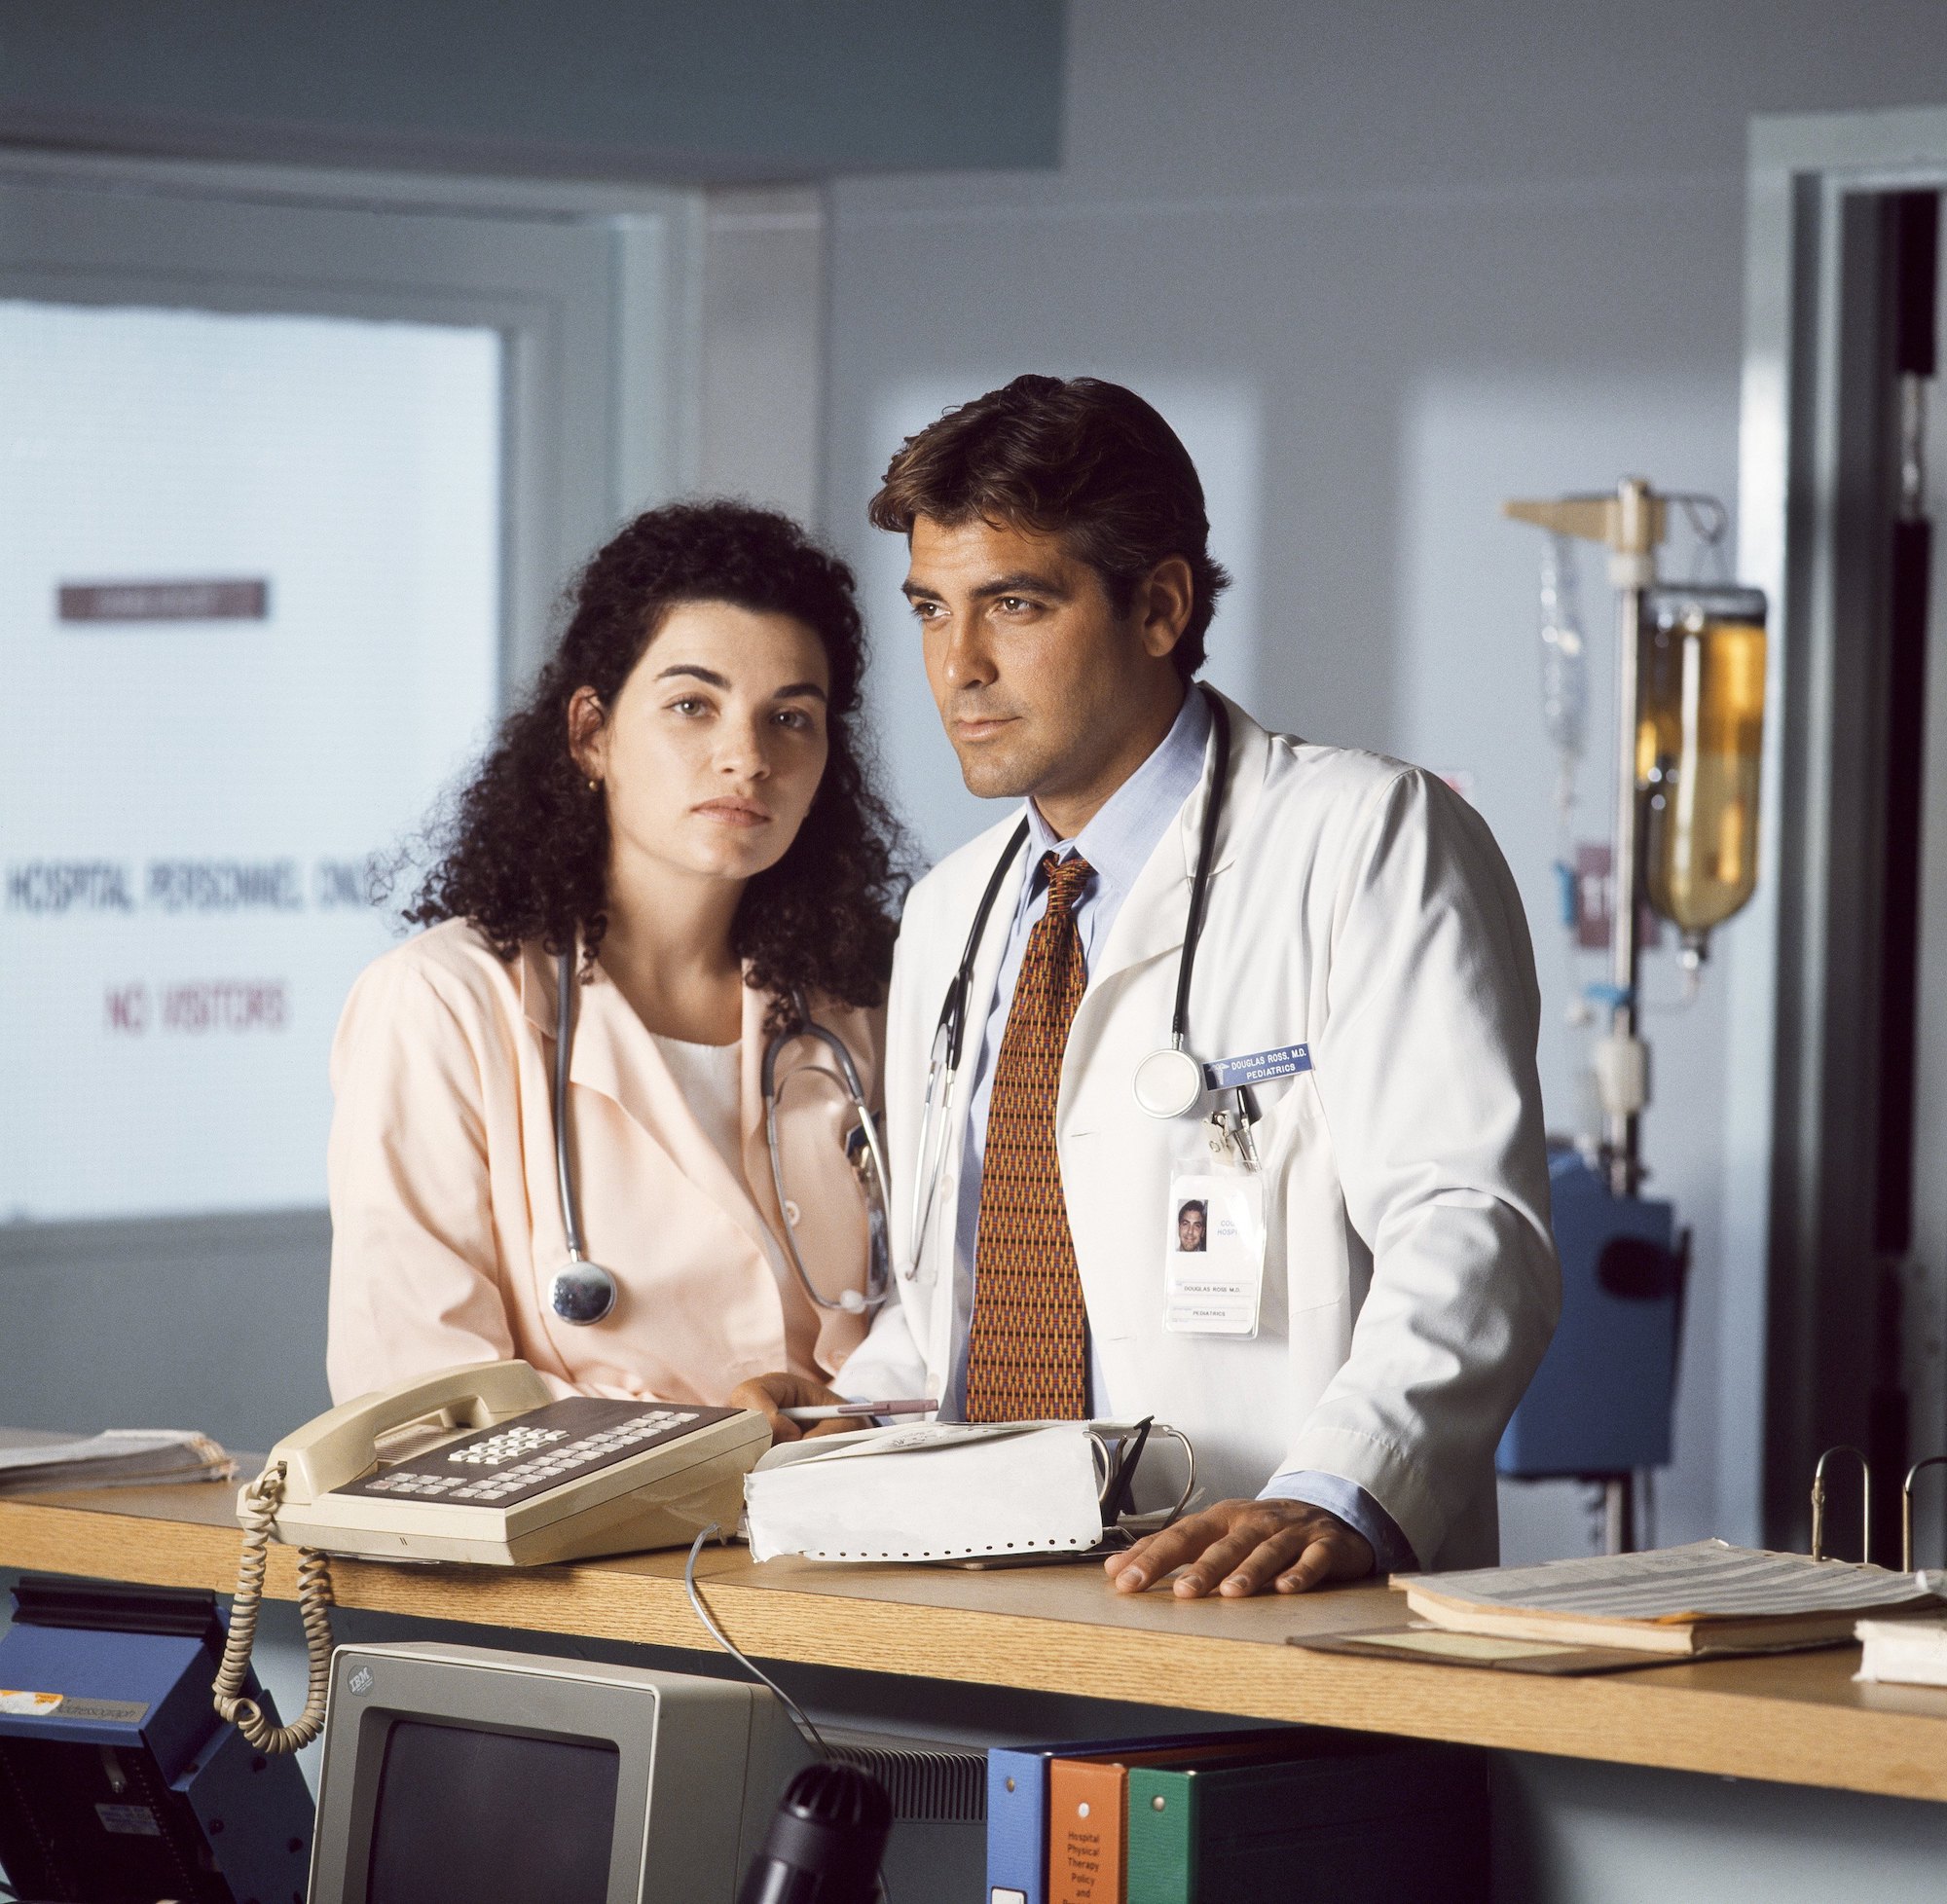 Julianna Margulies and George Clooney on the 'ER' set